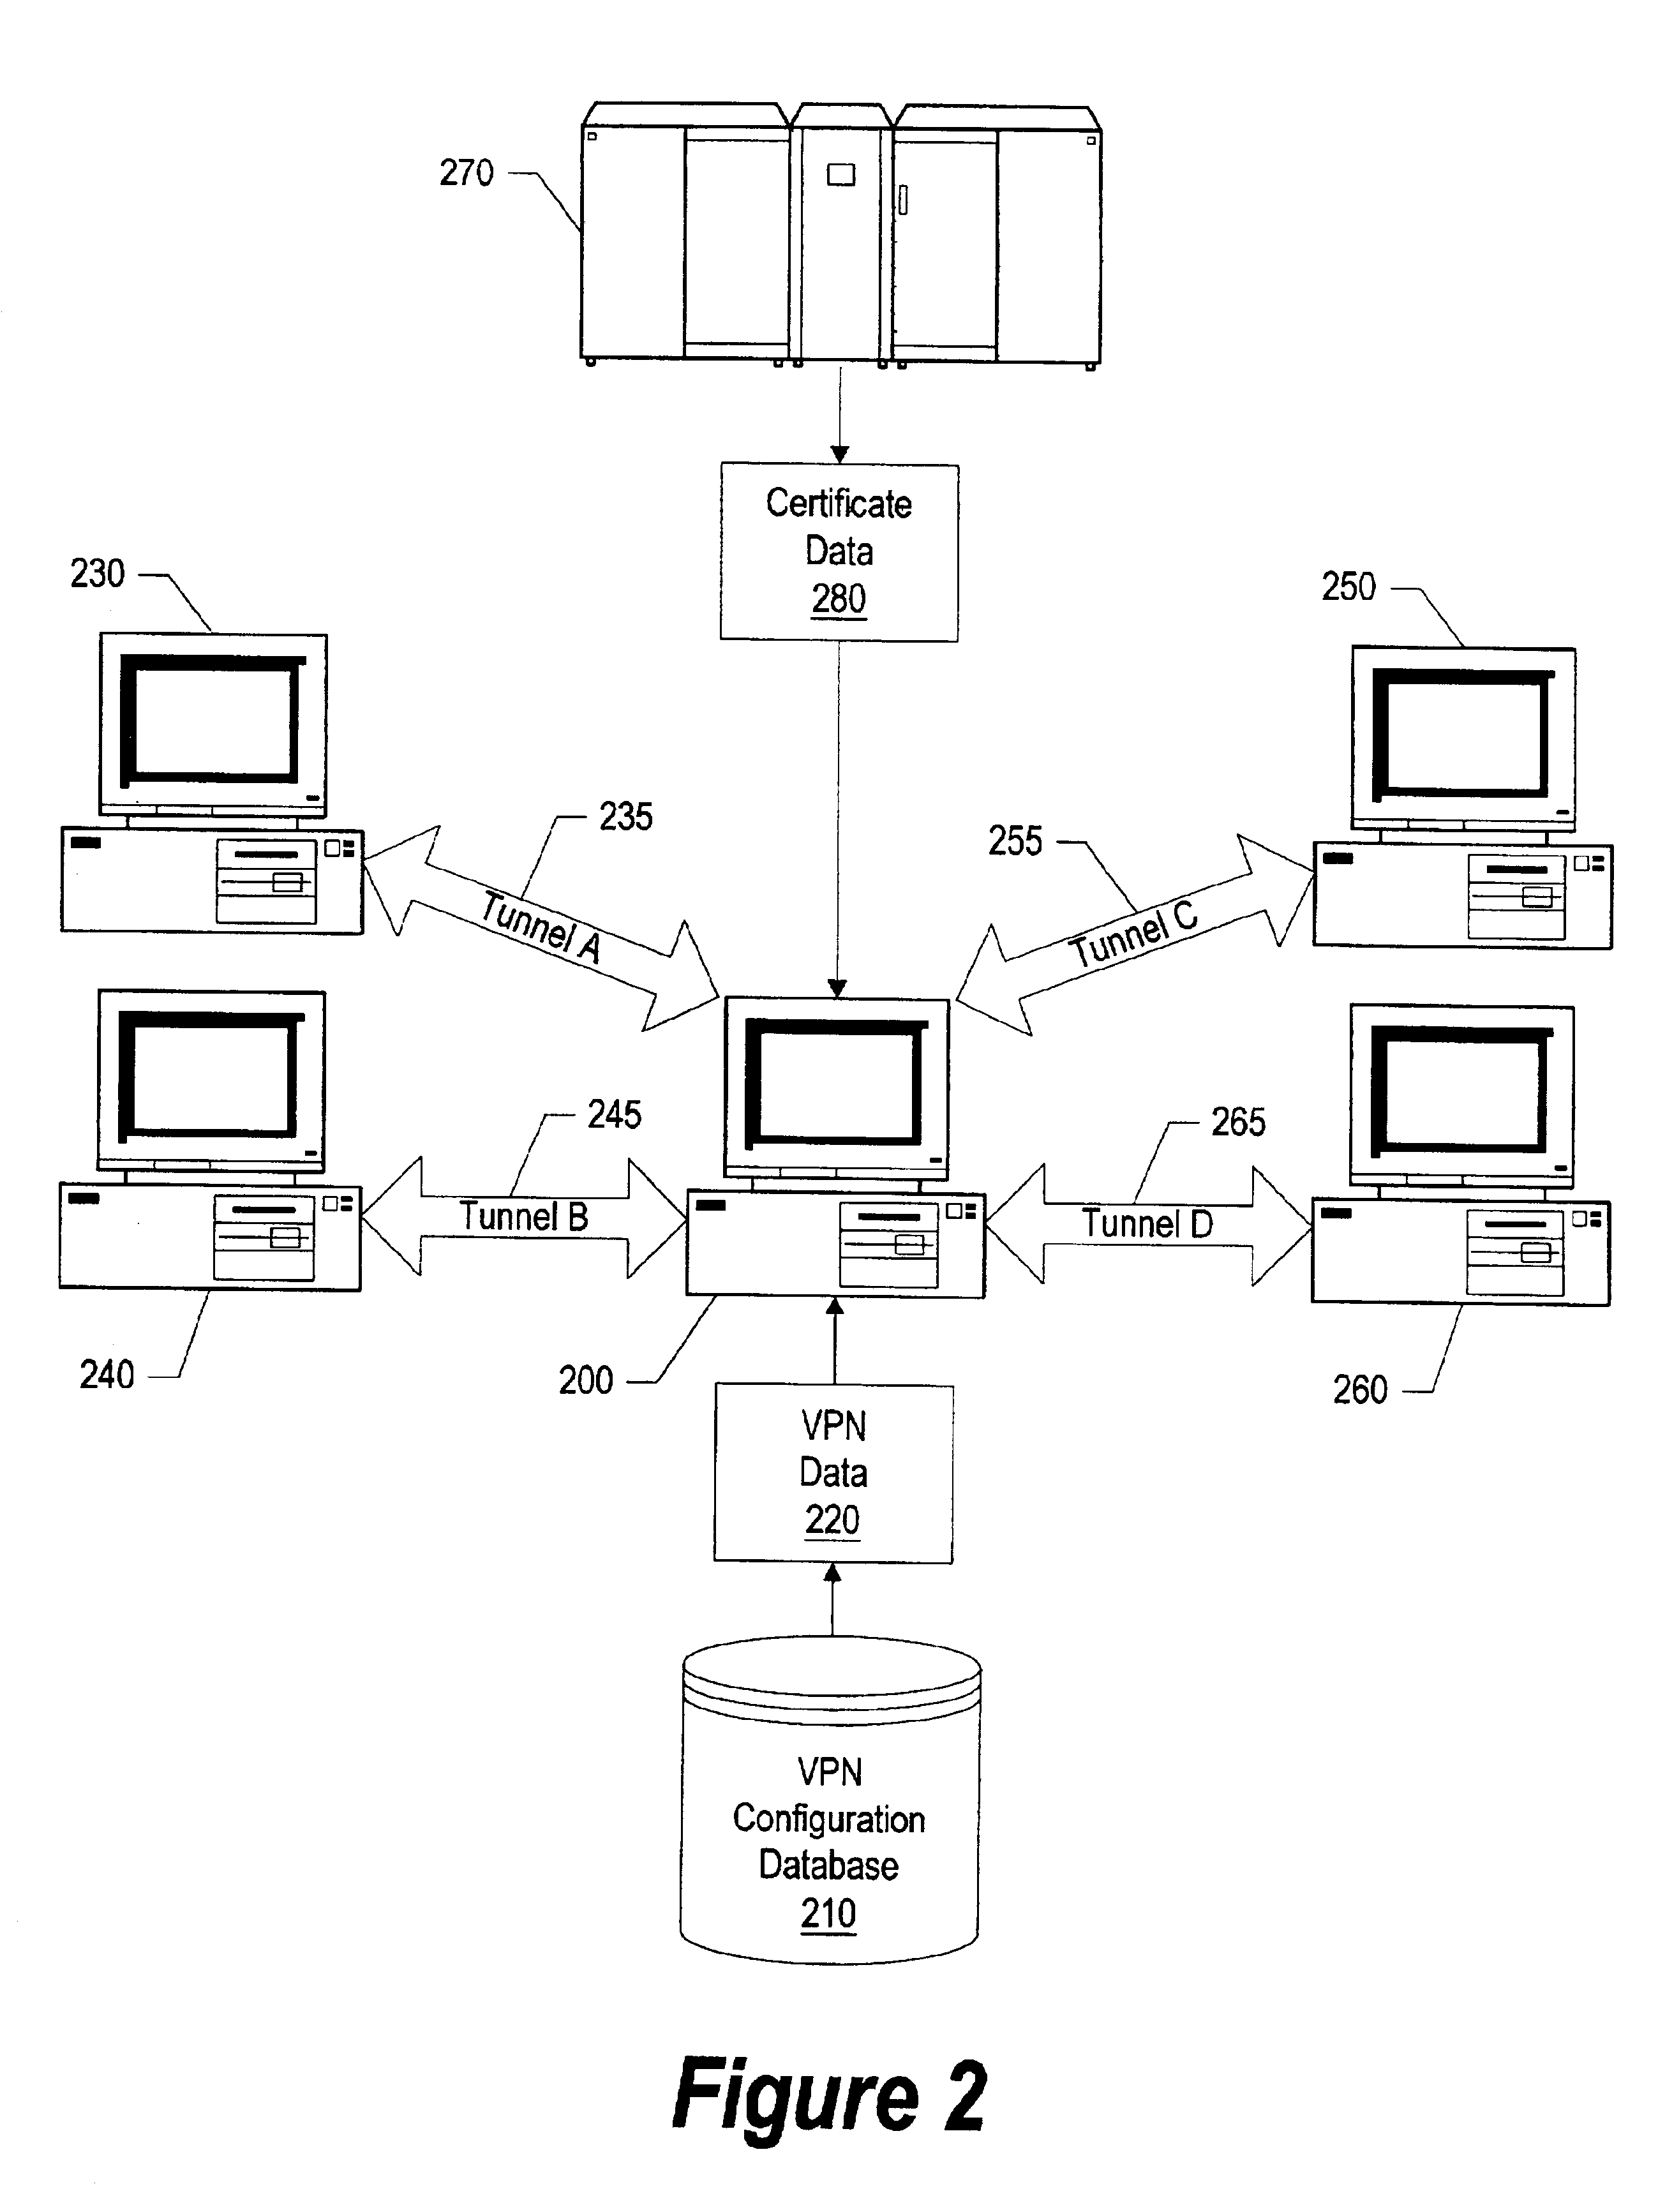 System and method for multiple virtual private network authentication schemes